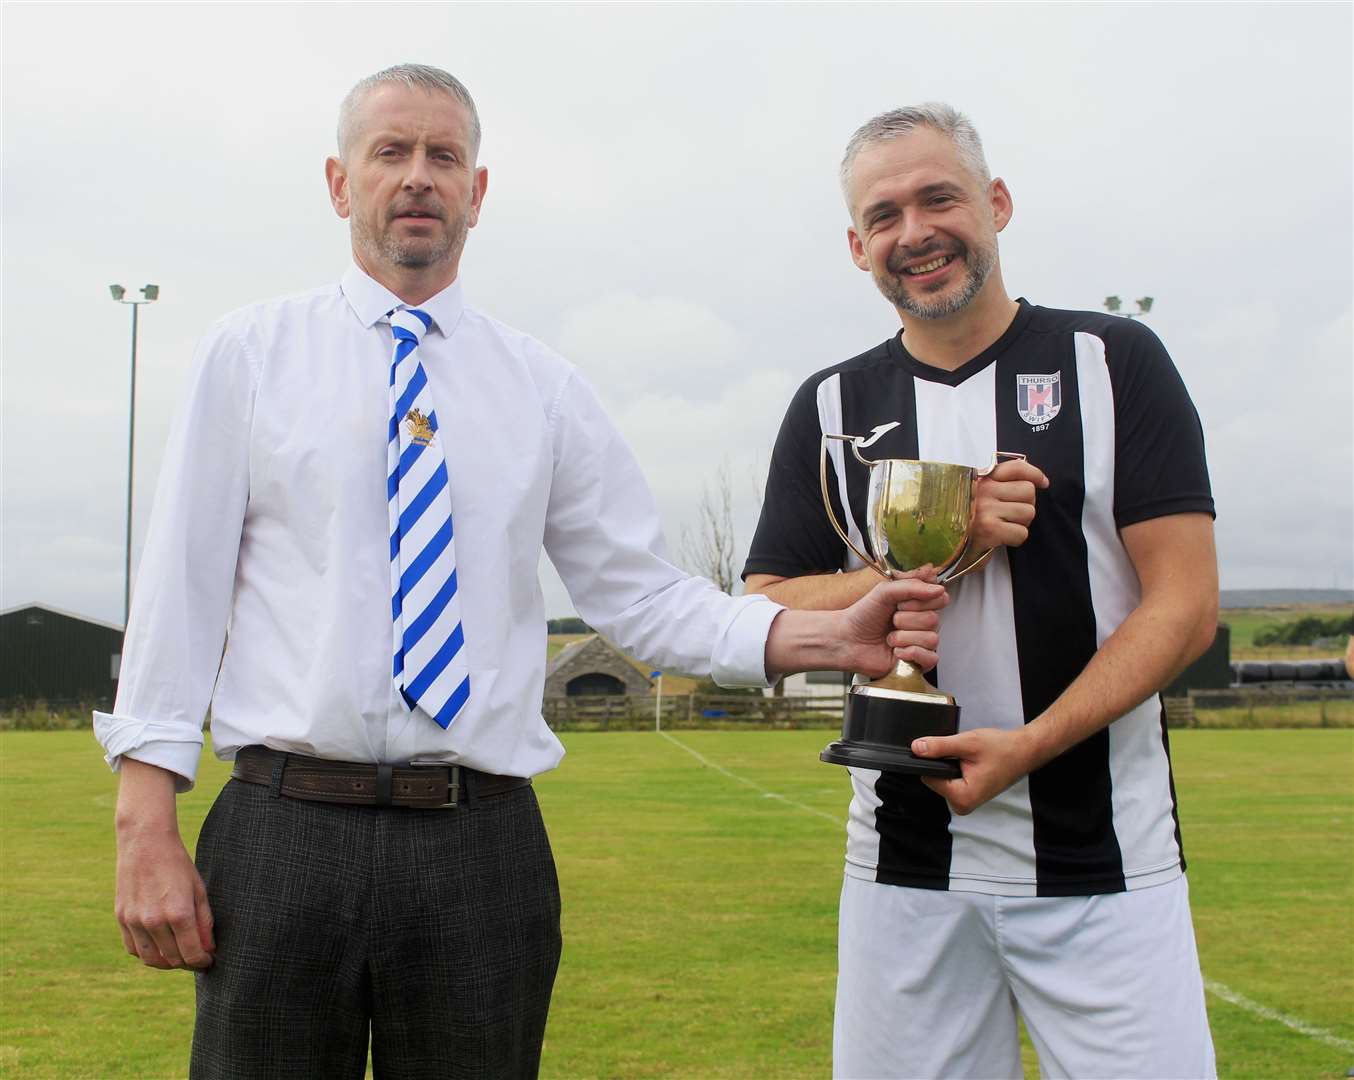 Lybster chairman Andrew Mackenzie presenting the Steven Cup to Darryn Mackay of Swifts. Picture: Alan Hendry